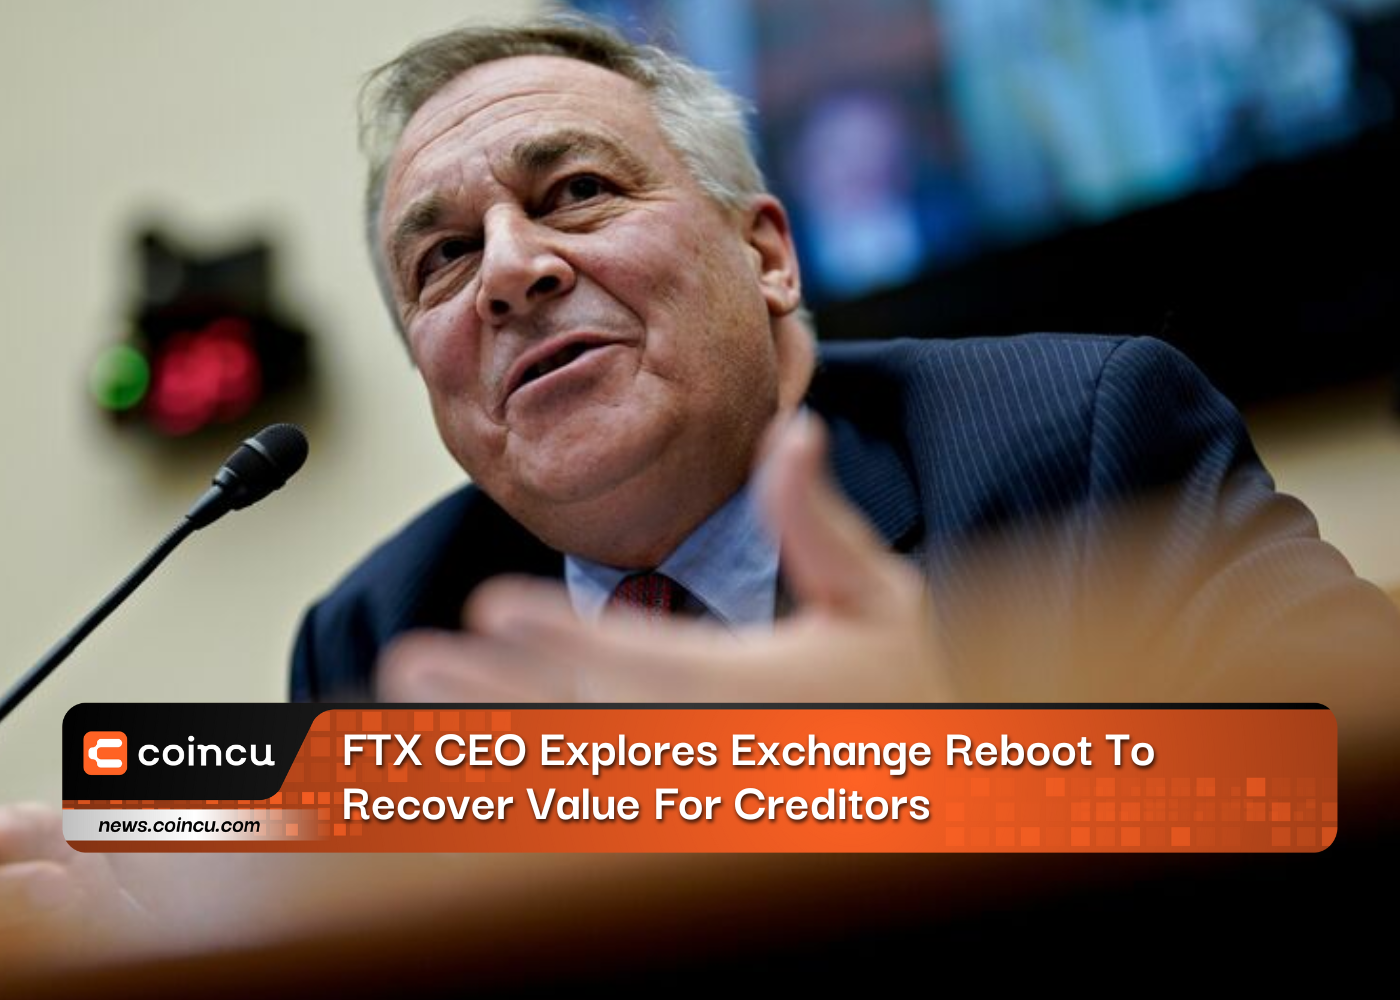 FTX CEO Explores Exchange Reboot To Recover Value For Creditors